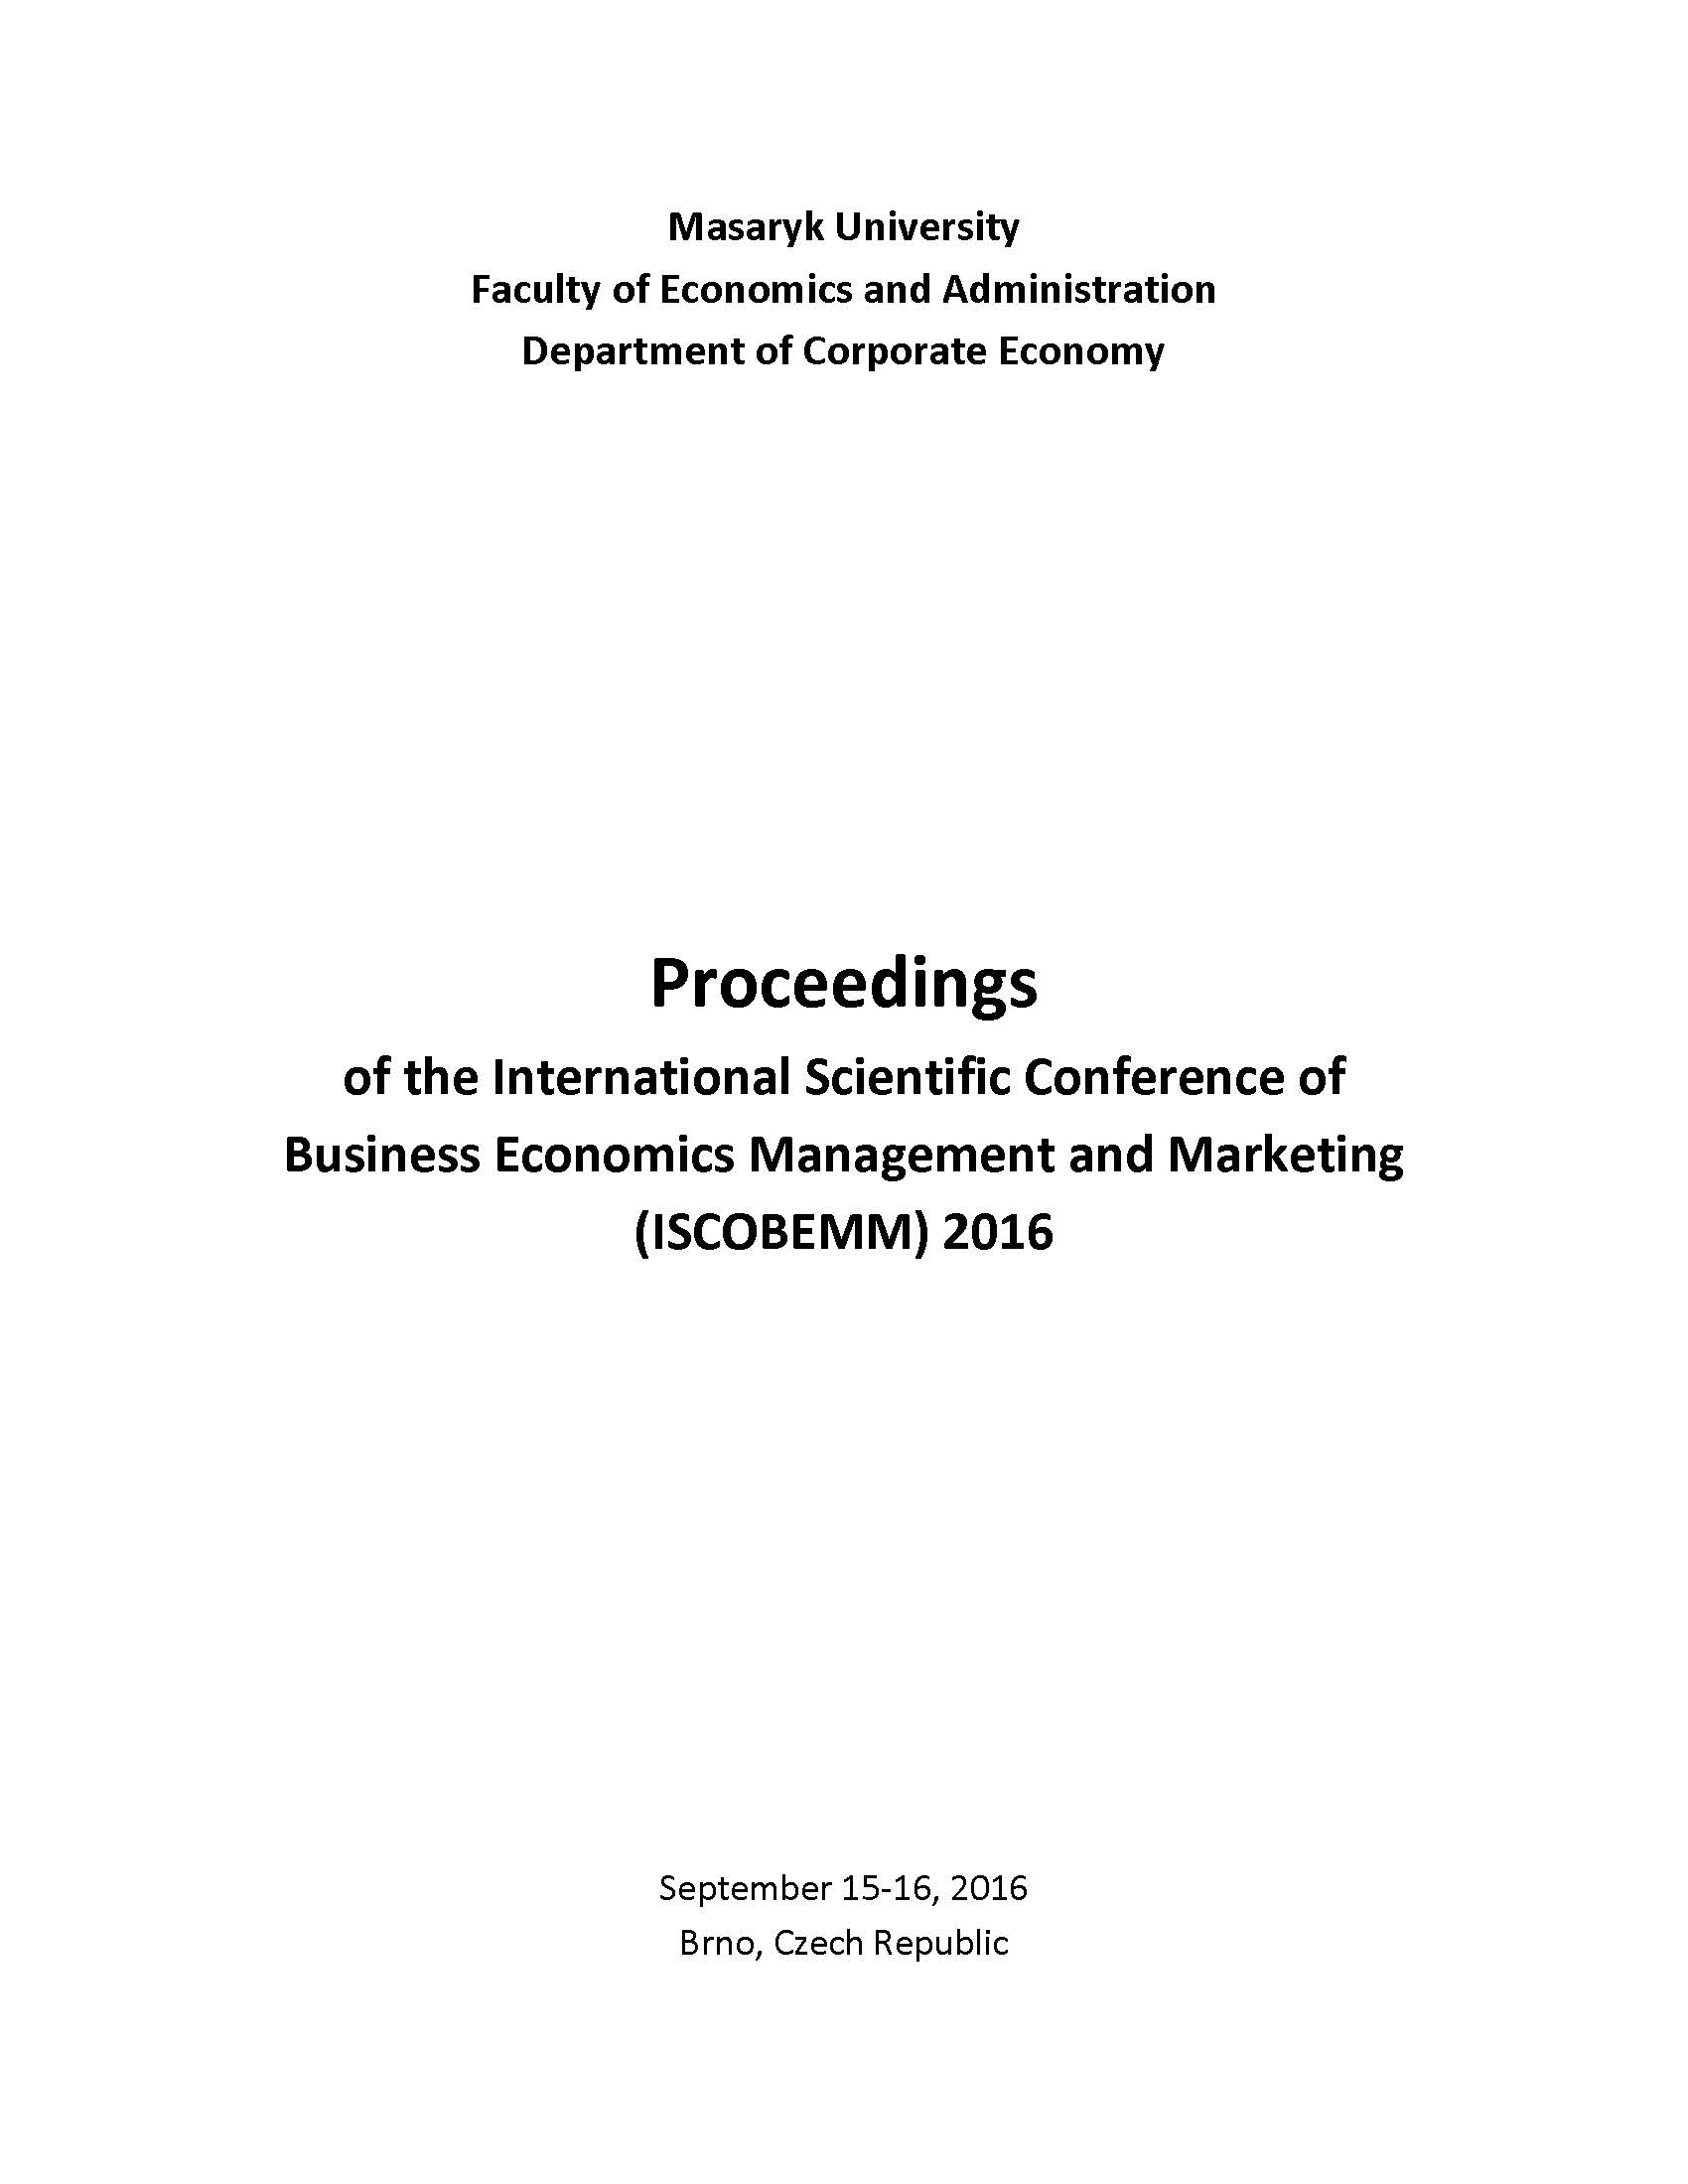 Obálka pro Proceedings of the International Scientific Conference of Business Economics Management and Marketing (ISCOBEMM) 2016